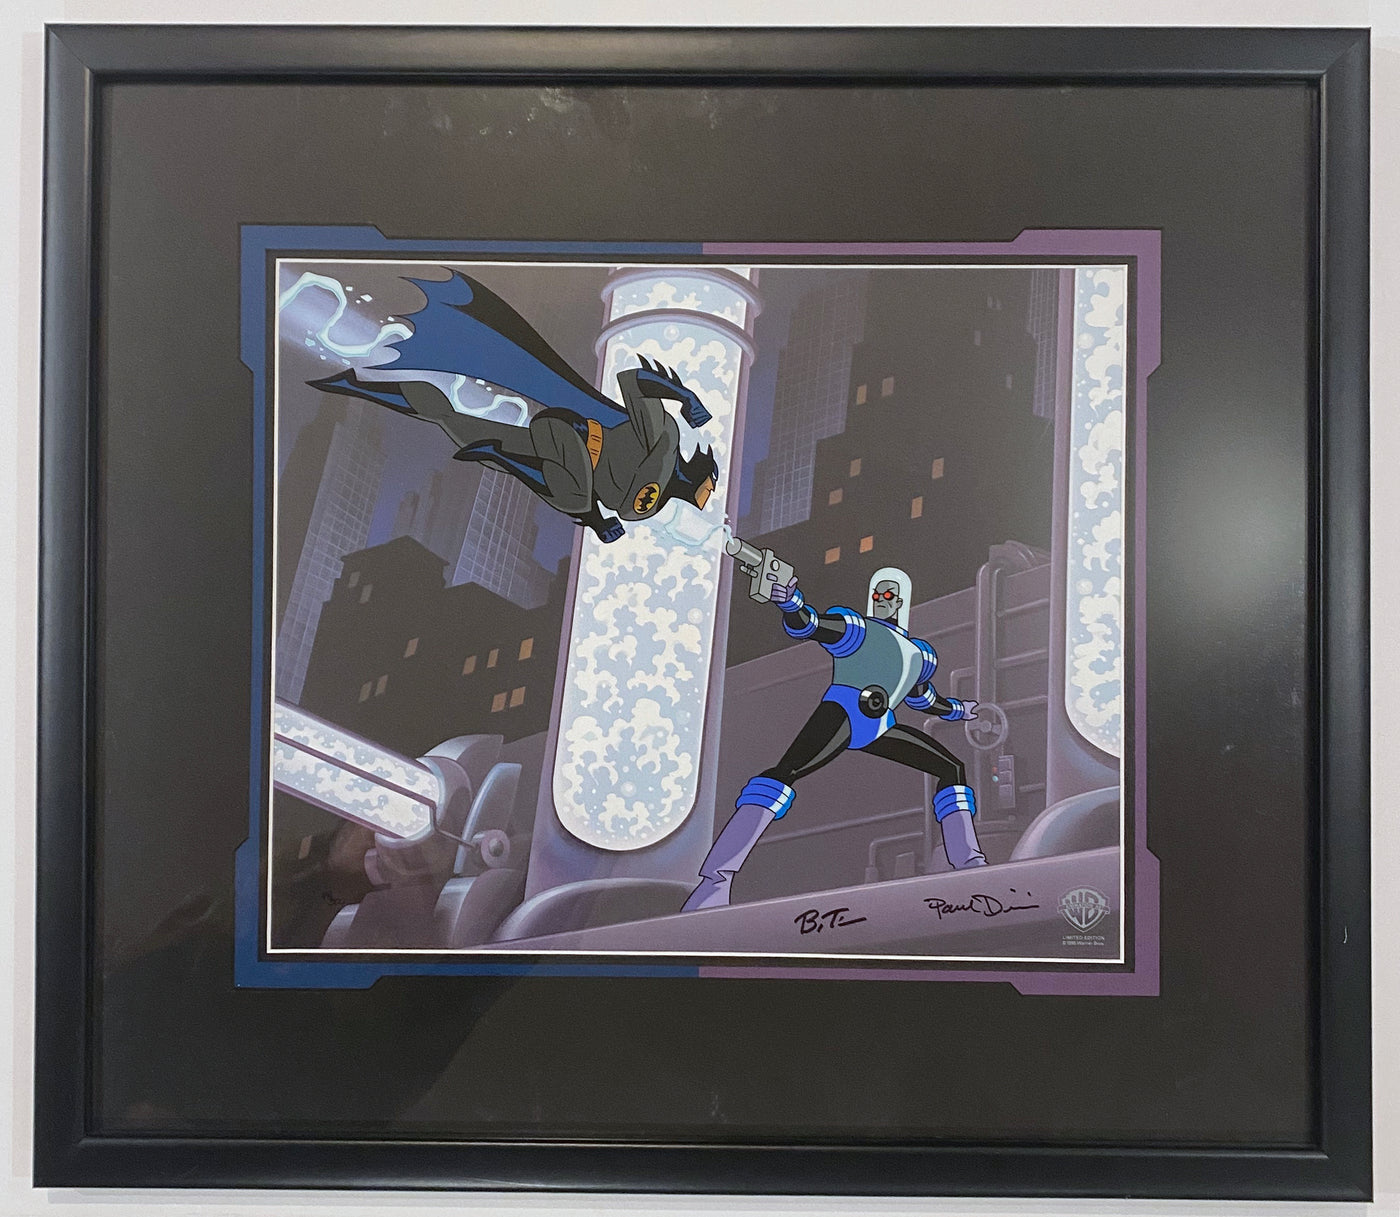 Original WB Production Cel from The Animated Series The Adventures of Batman and Mr. Freeze "Heart of Ice"